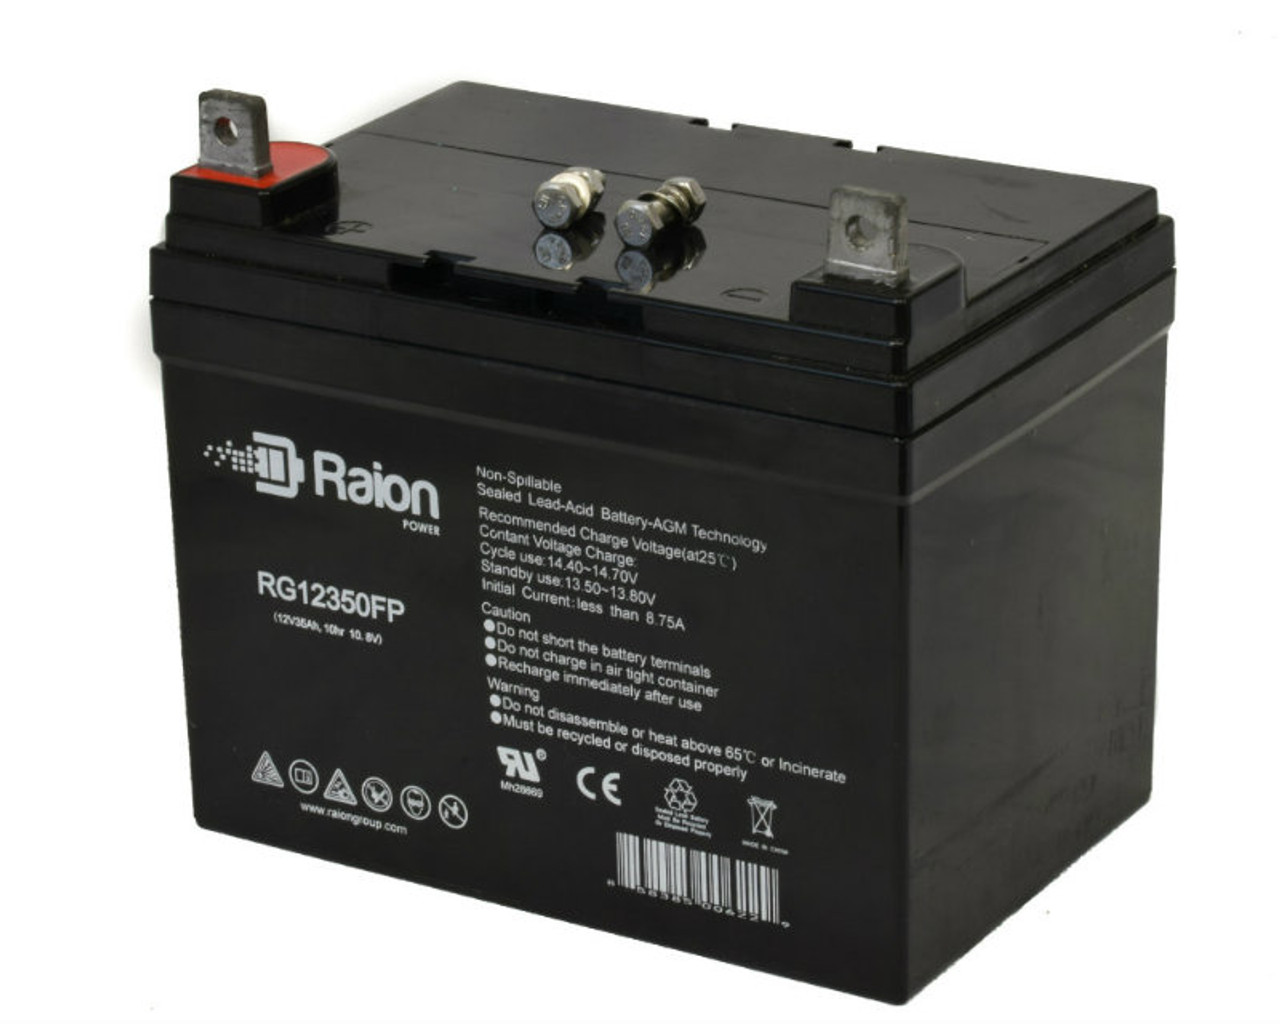 Raion Power Replacement 12V 35Ah RG12350FP Battery for Ariens Gravely 1340H